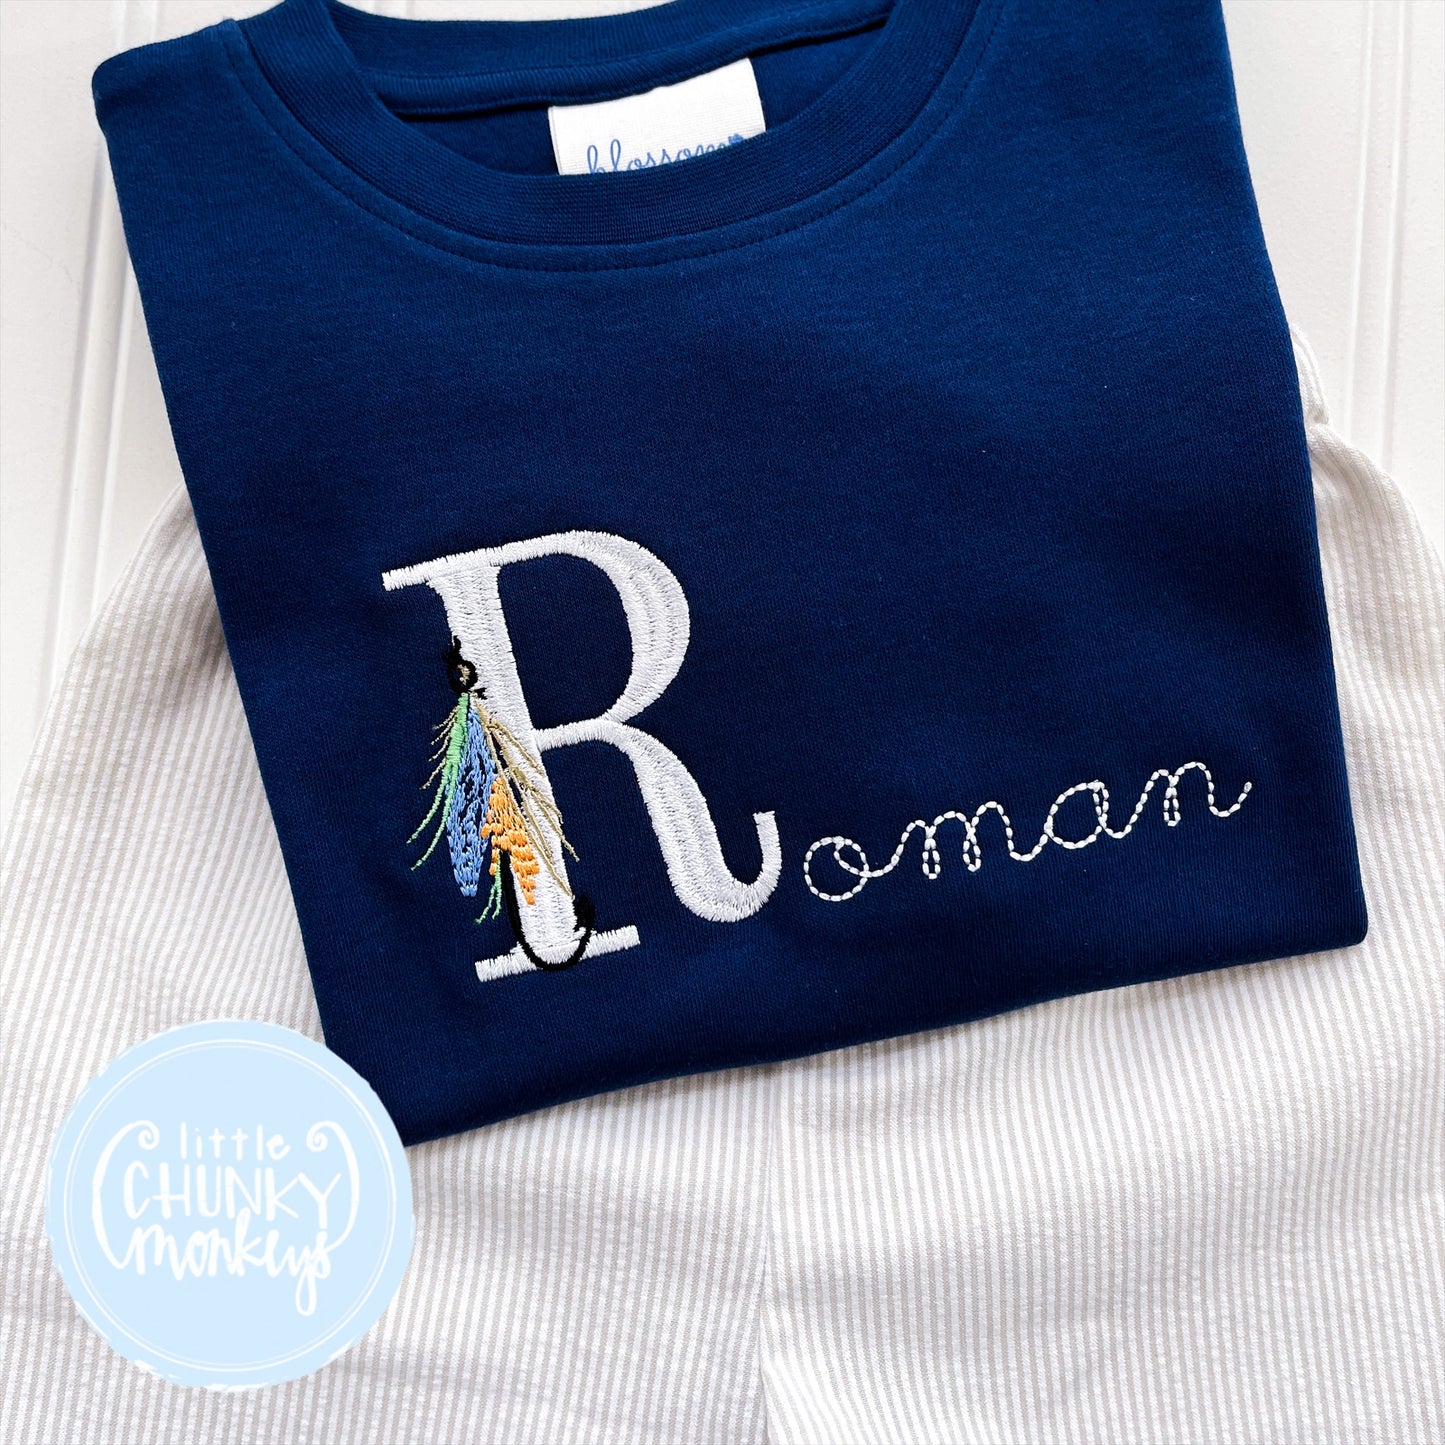 Boy Shirt- Fly Fishing with Name on Navy Blue